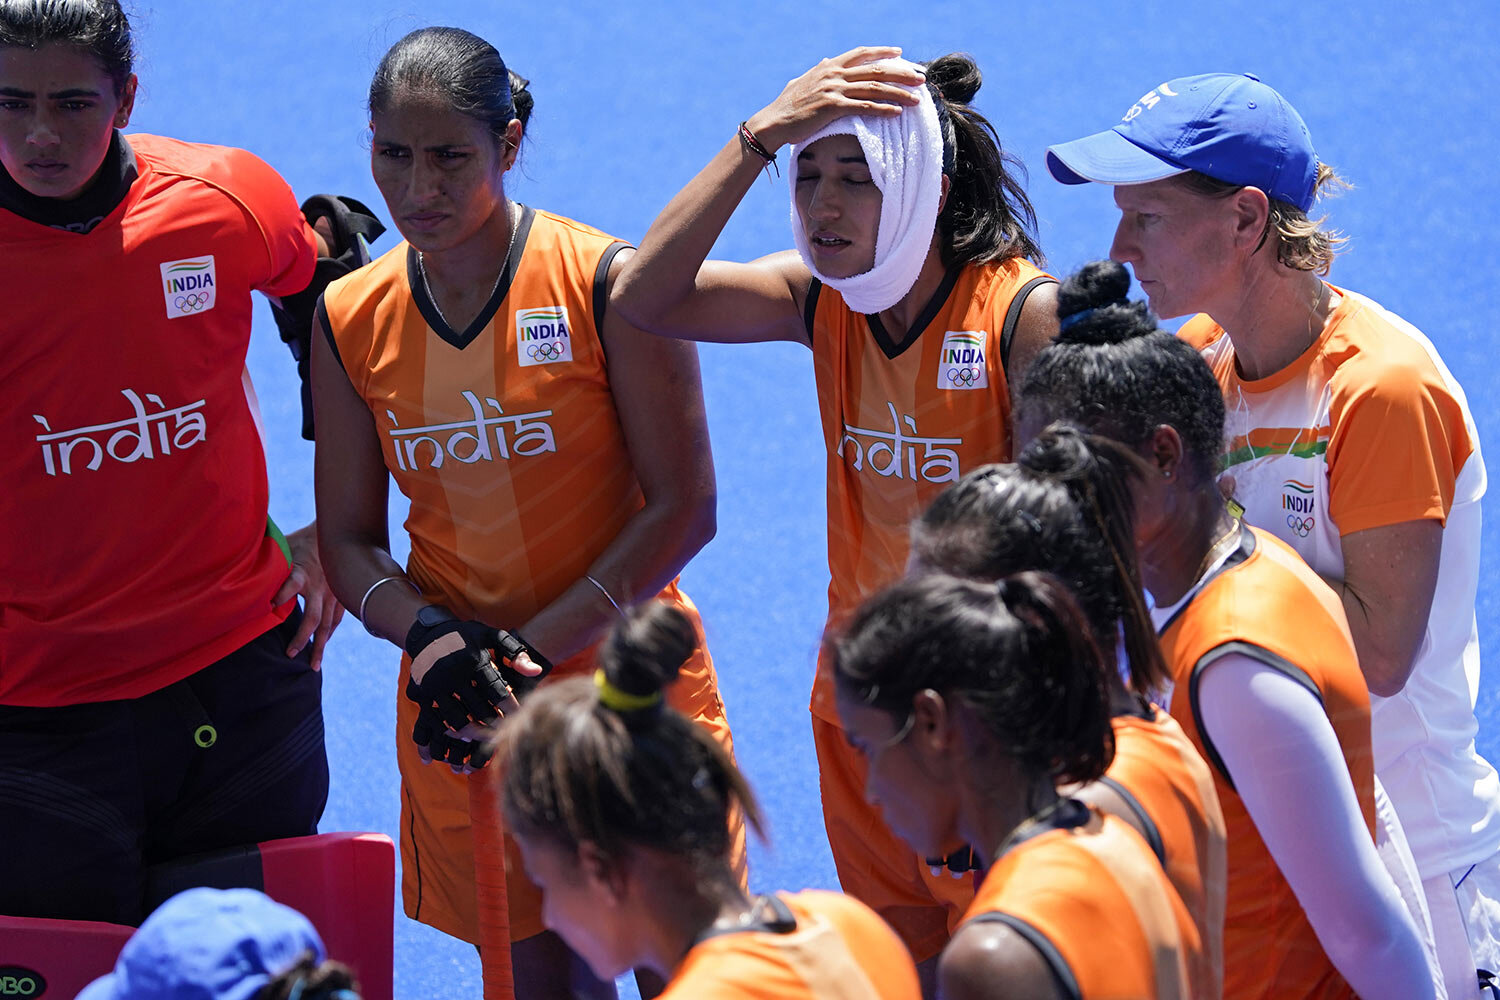  Members of the India women's field hockey team cool off during a training session at Oi Hockey Stadium ahead of the the 2020 Summer Olympics, Thursday, July 22, 2021, in Tokyo, Japan. (AP Photo/John Locher) 